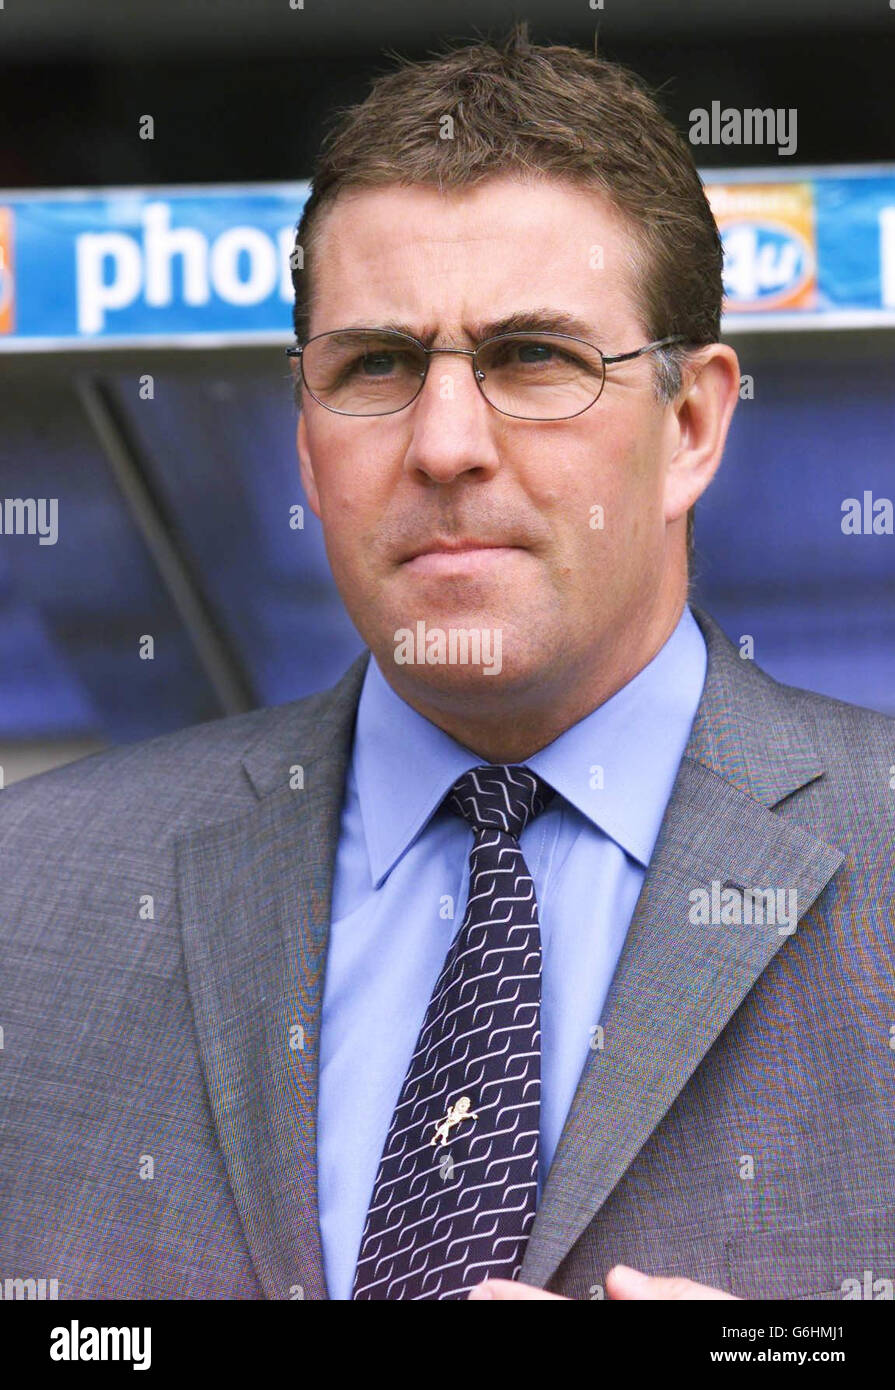 Millwall Manager Mark McGhee, who's contract was terminated by mutual consent by Millwall following the 1-0 home defeat to Preston last night. Lions fans jeered the Scot and chanted for him to quit after a poor performance. The club currently lie in eighth position, just one point off the play-off zone. Stock Photo